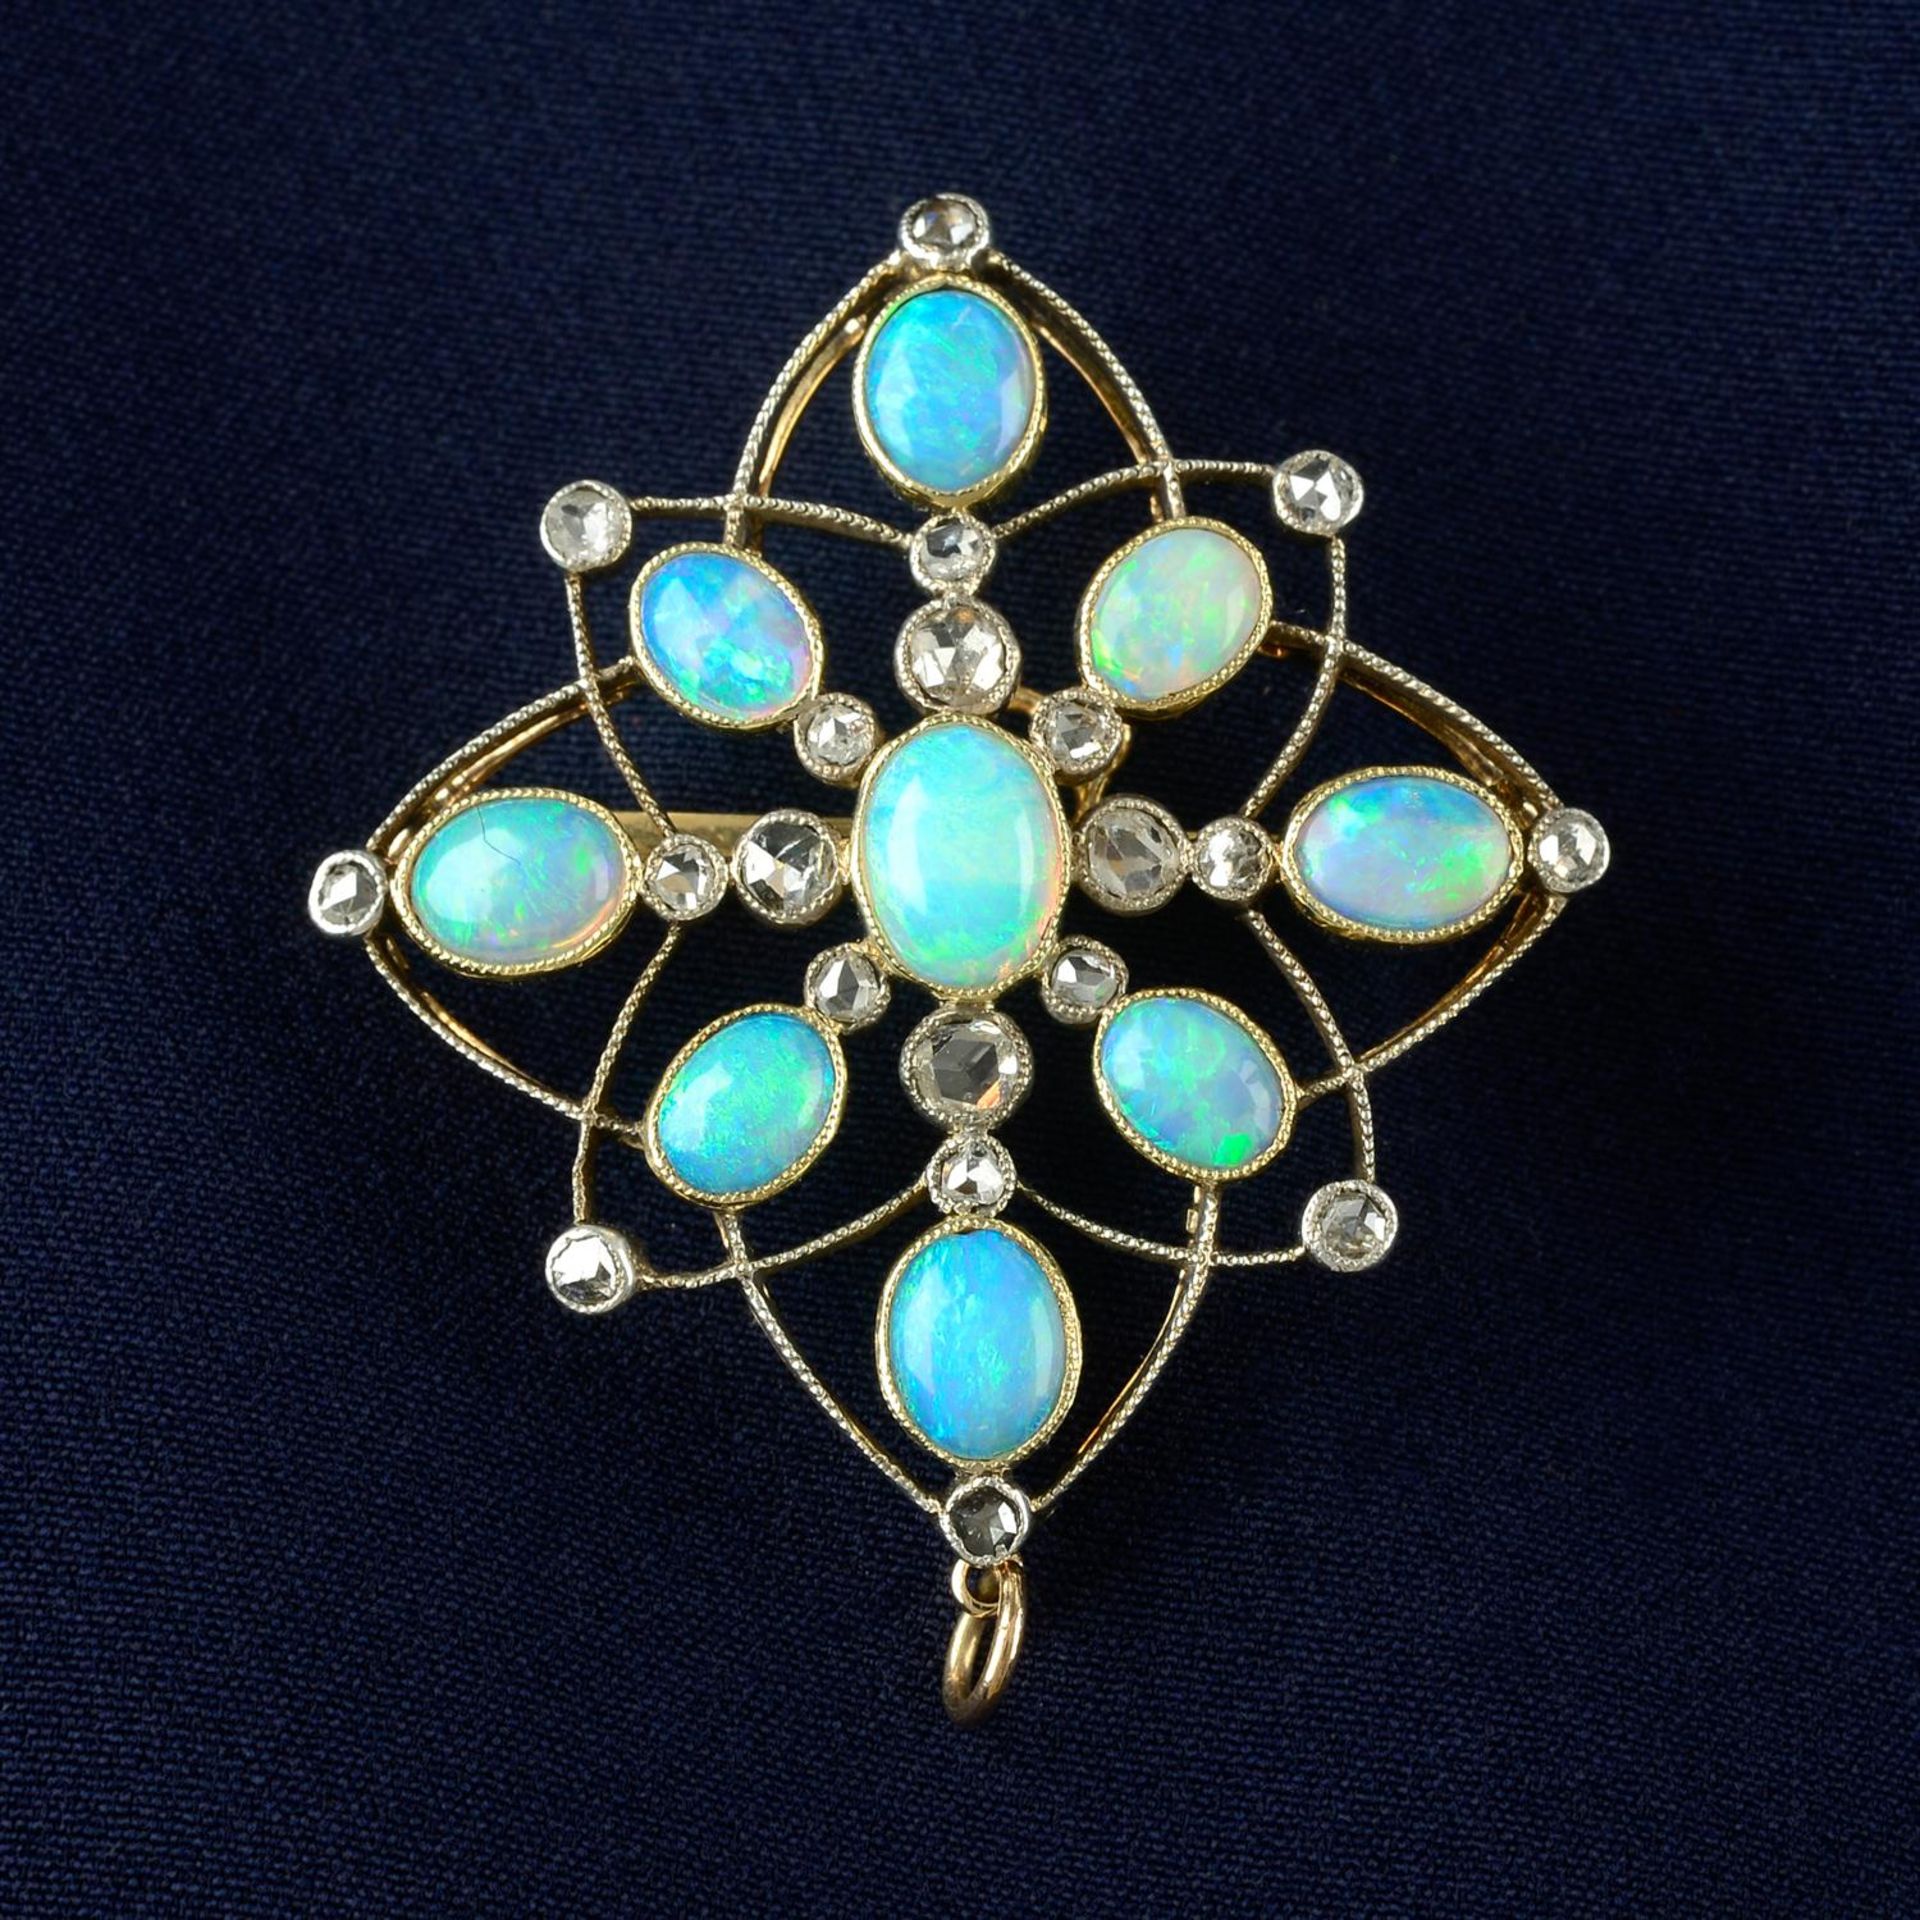 An early 20th century silver and gold, opal and rose-cut diamond brooch.